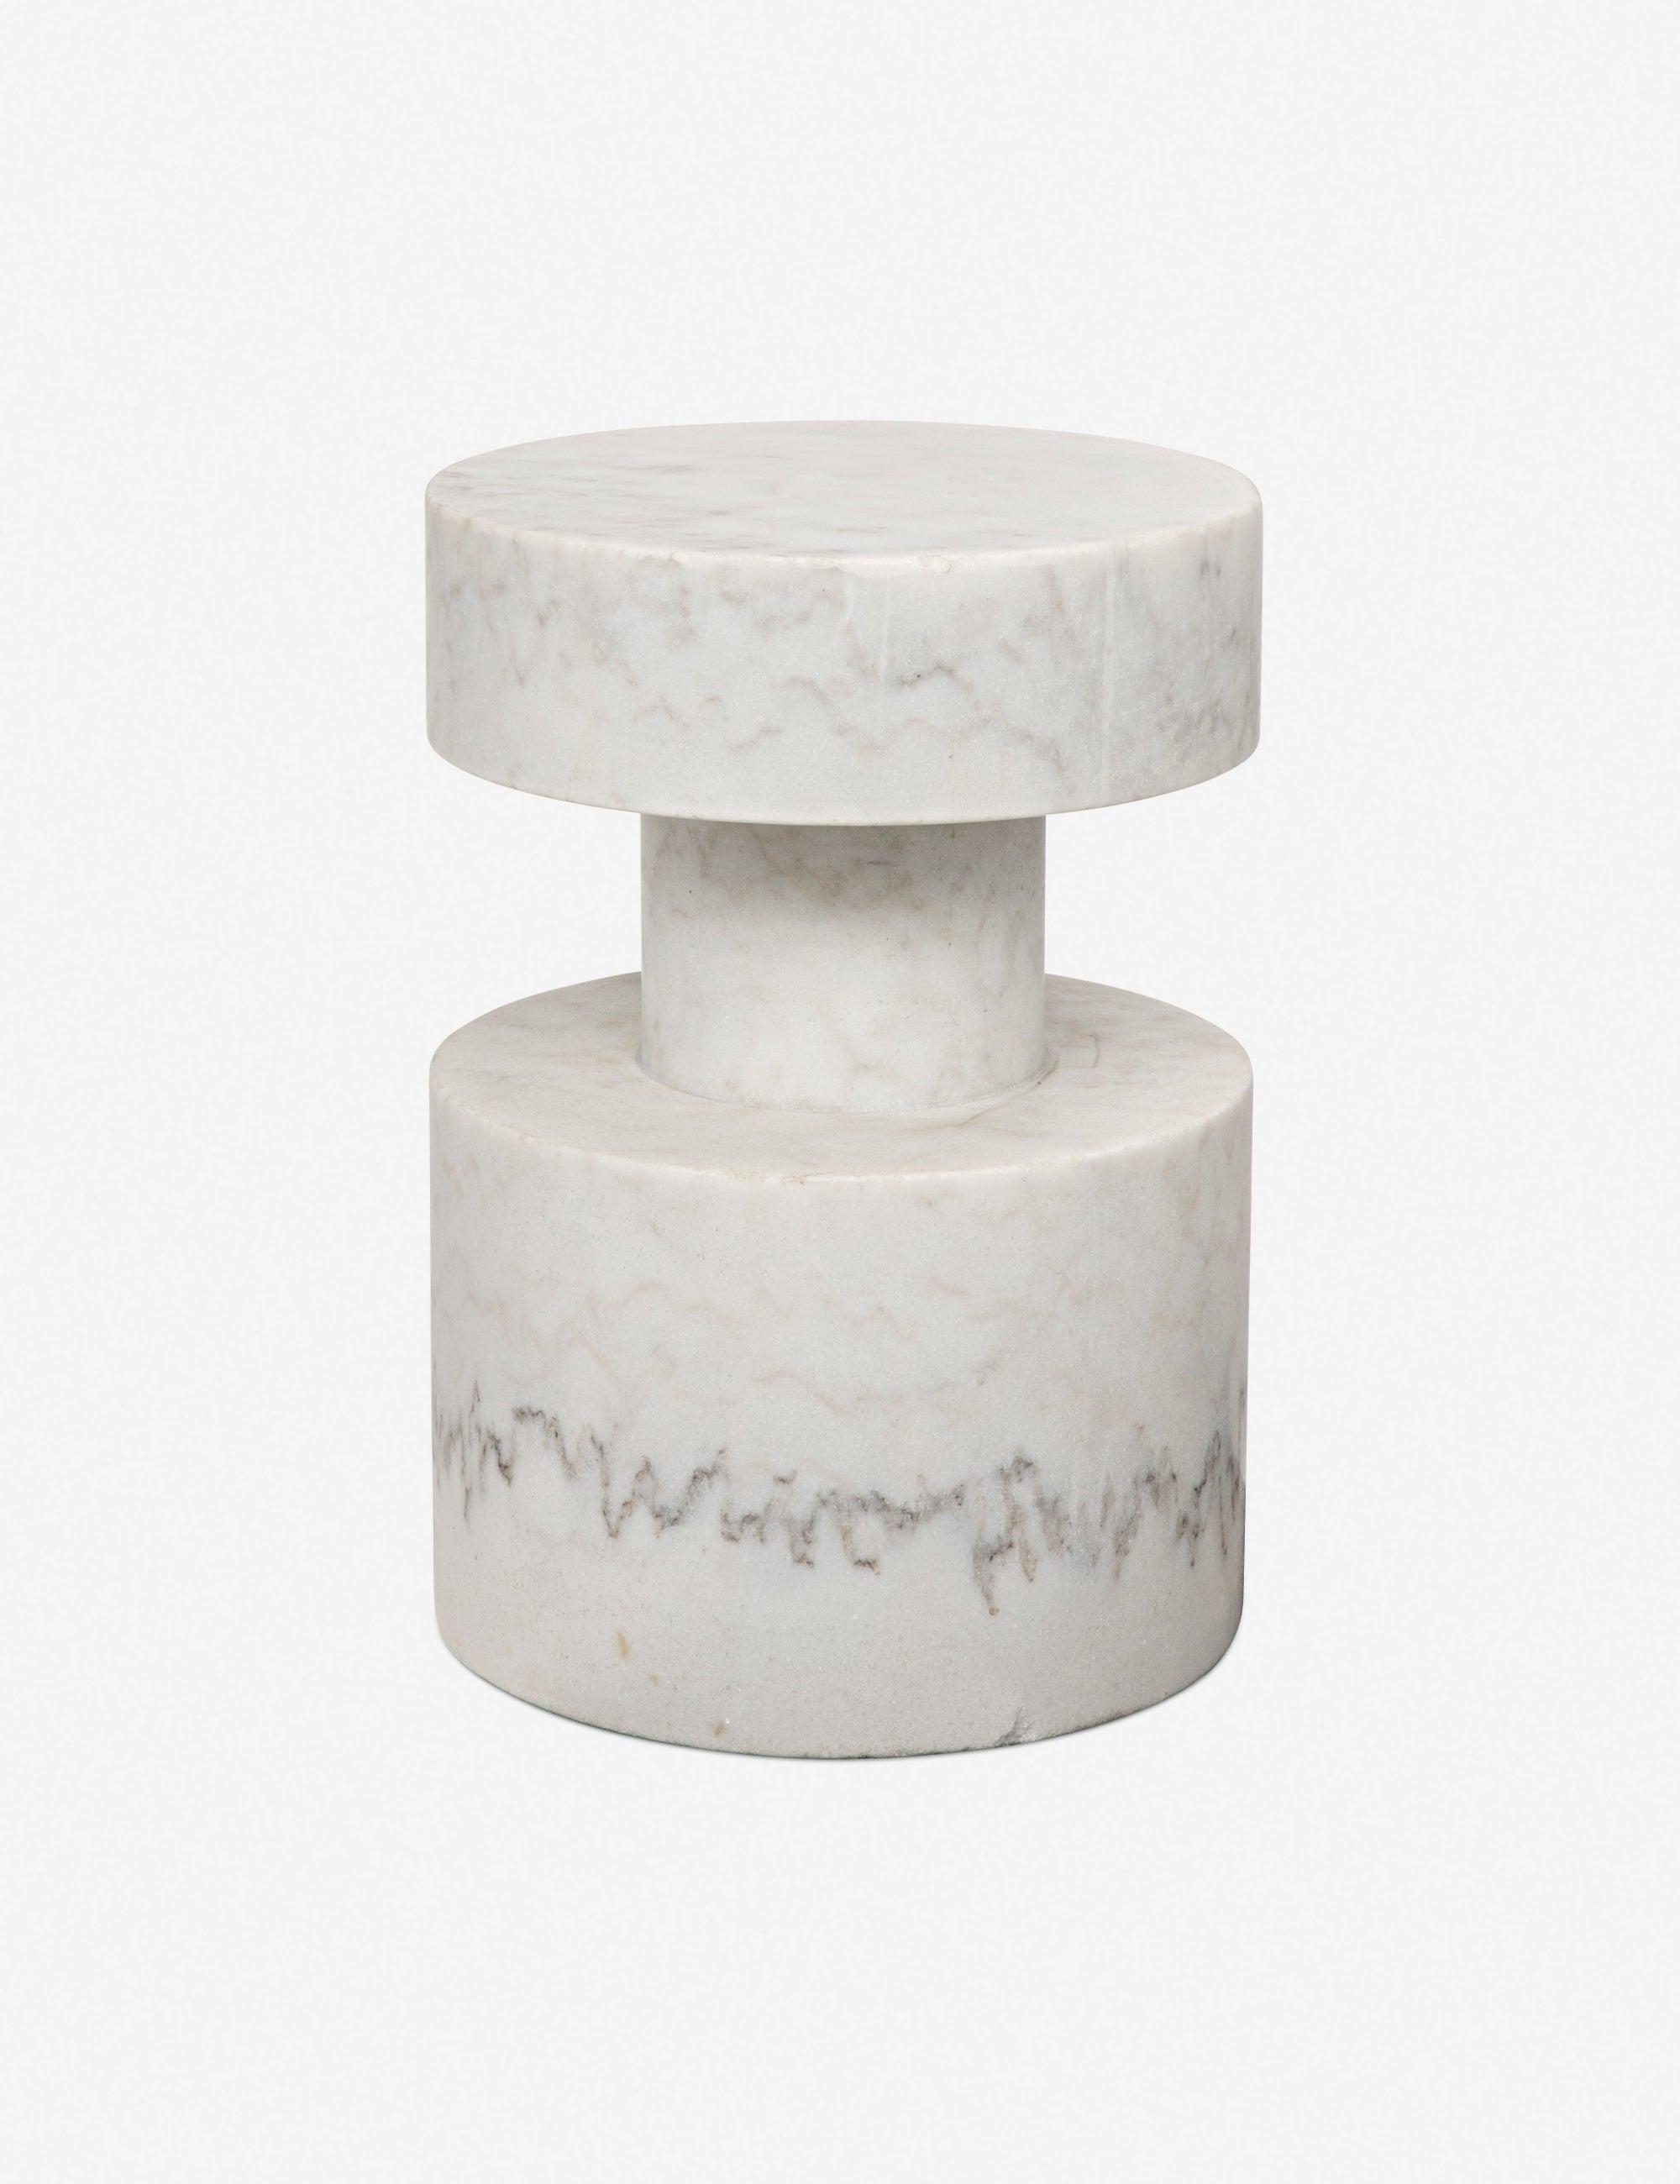 Cylindrical White Stone and Wood Modern Accent Table